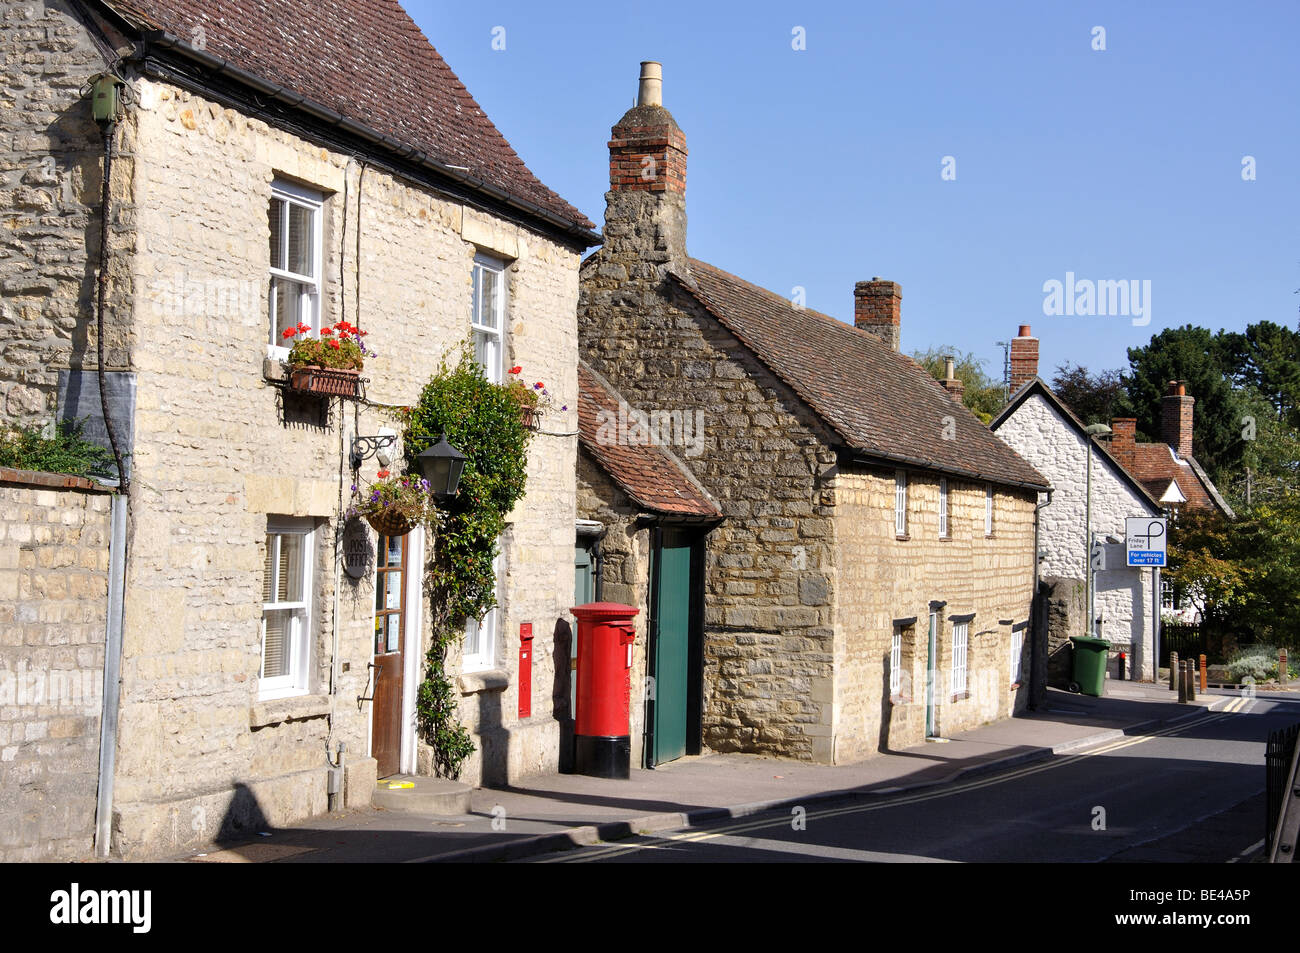 High Street, Wheatley, Oxfordshire, Angleterre, Royaume-Uni Banque D'Images